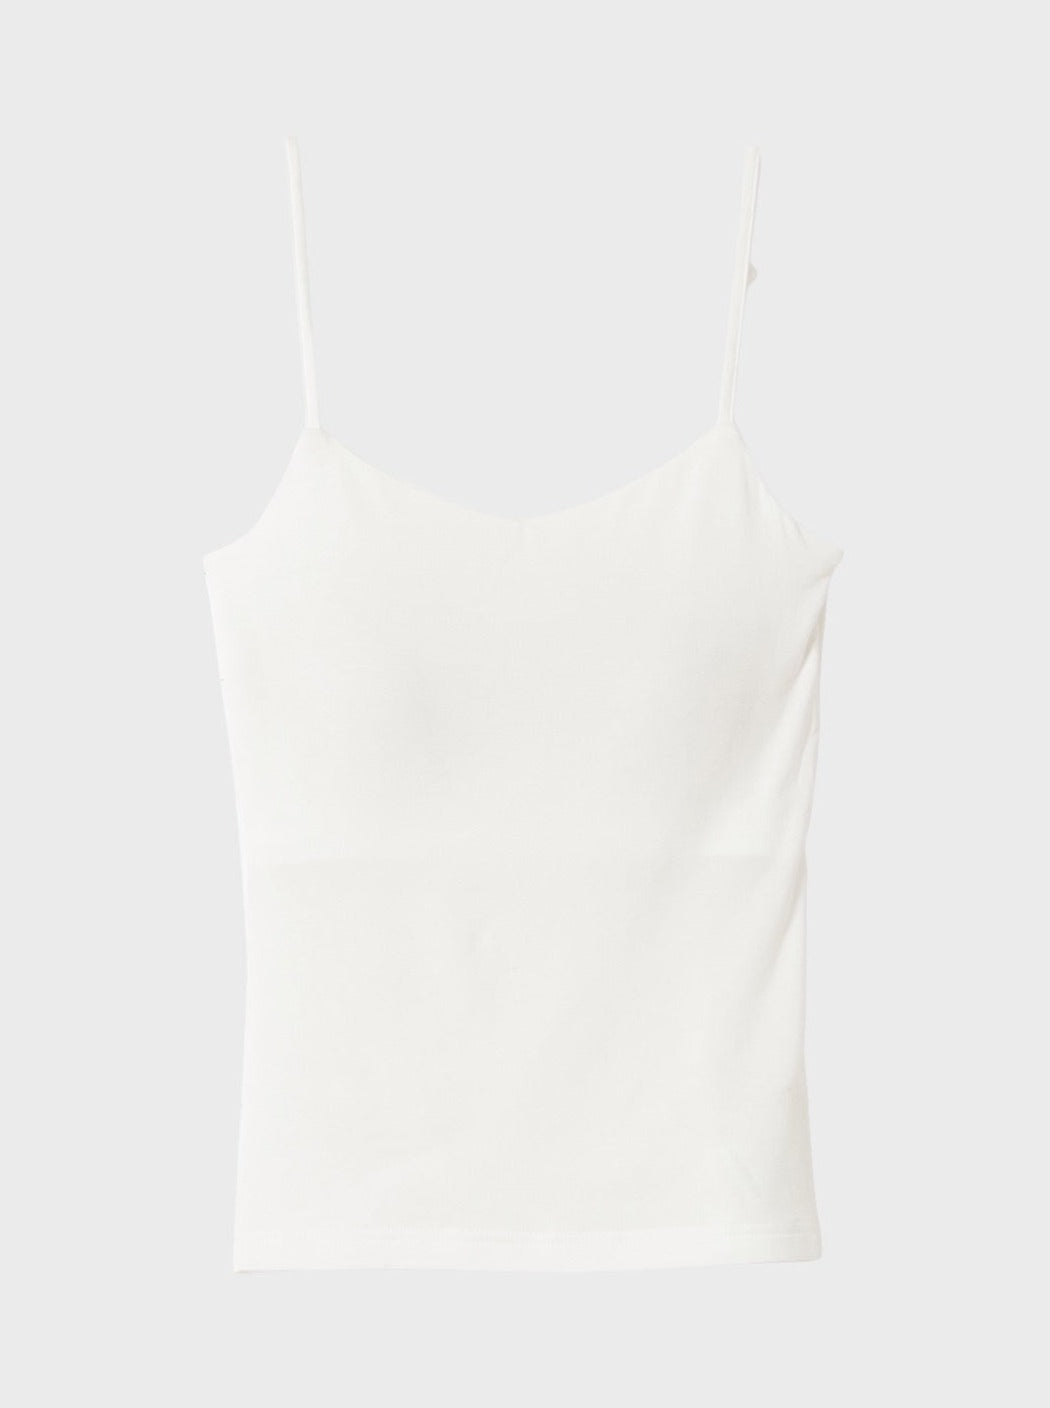 Label C back open camisole